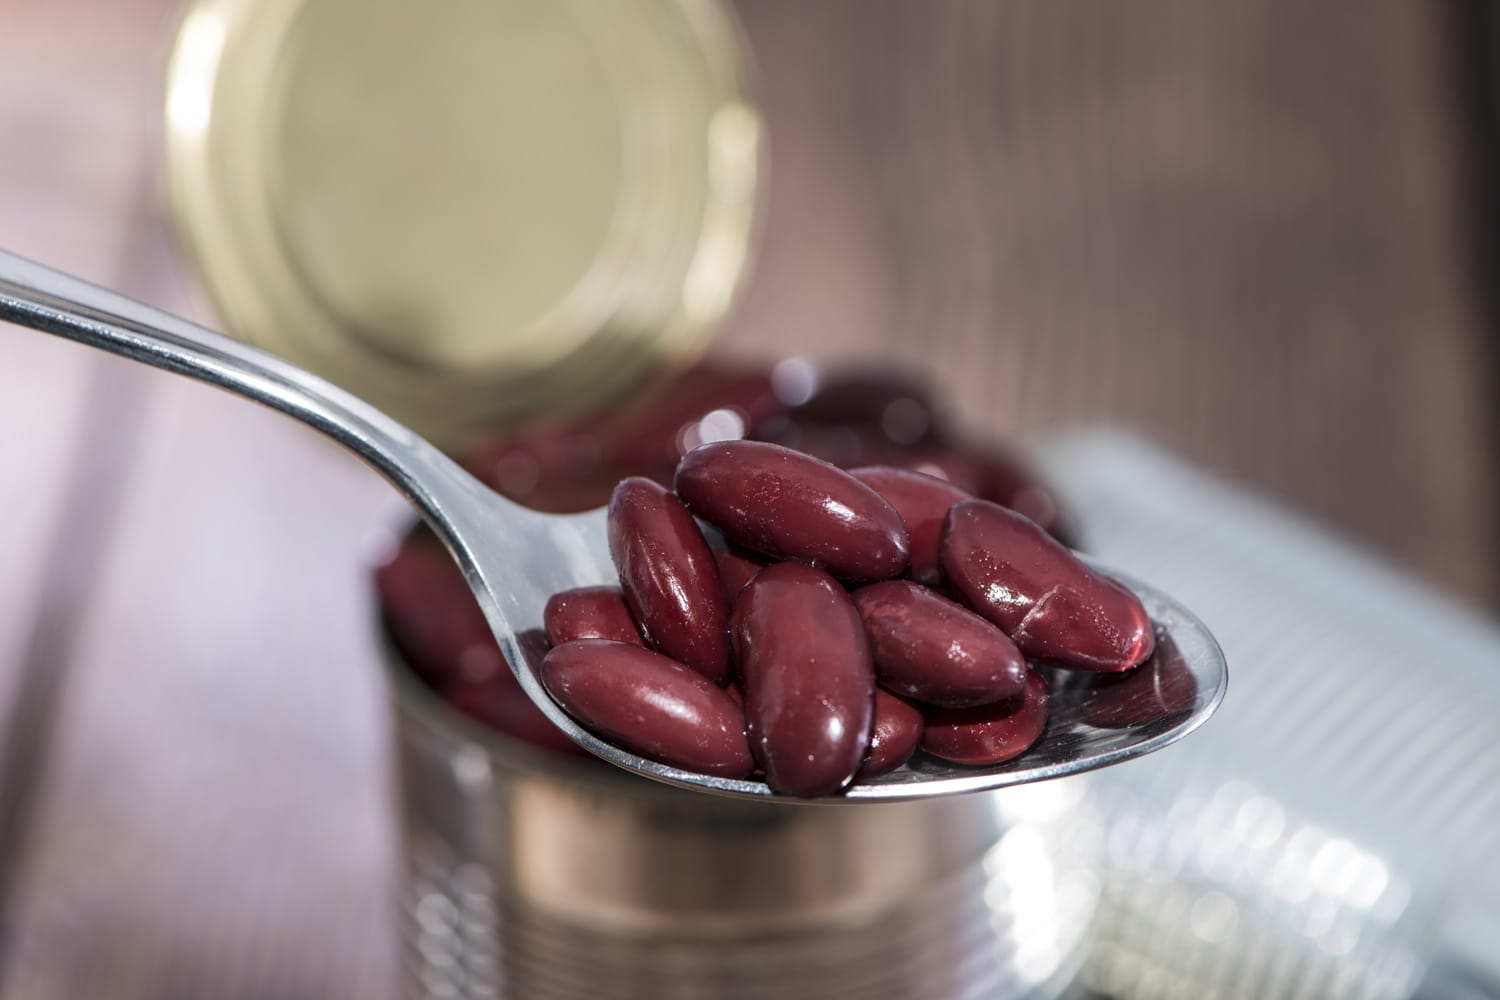 Kidney Beans on a Spoon with blurred cans in the background